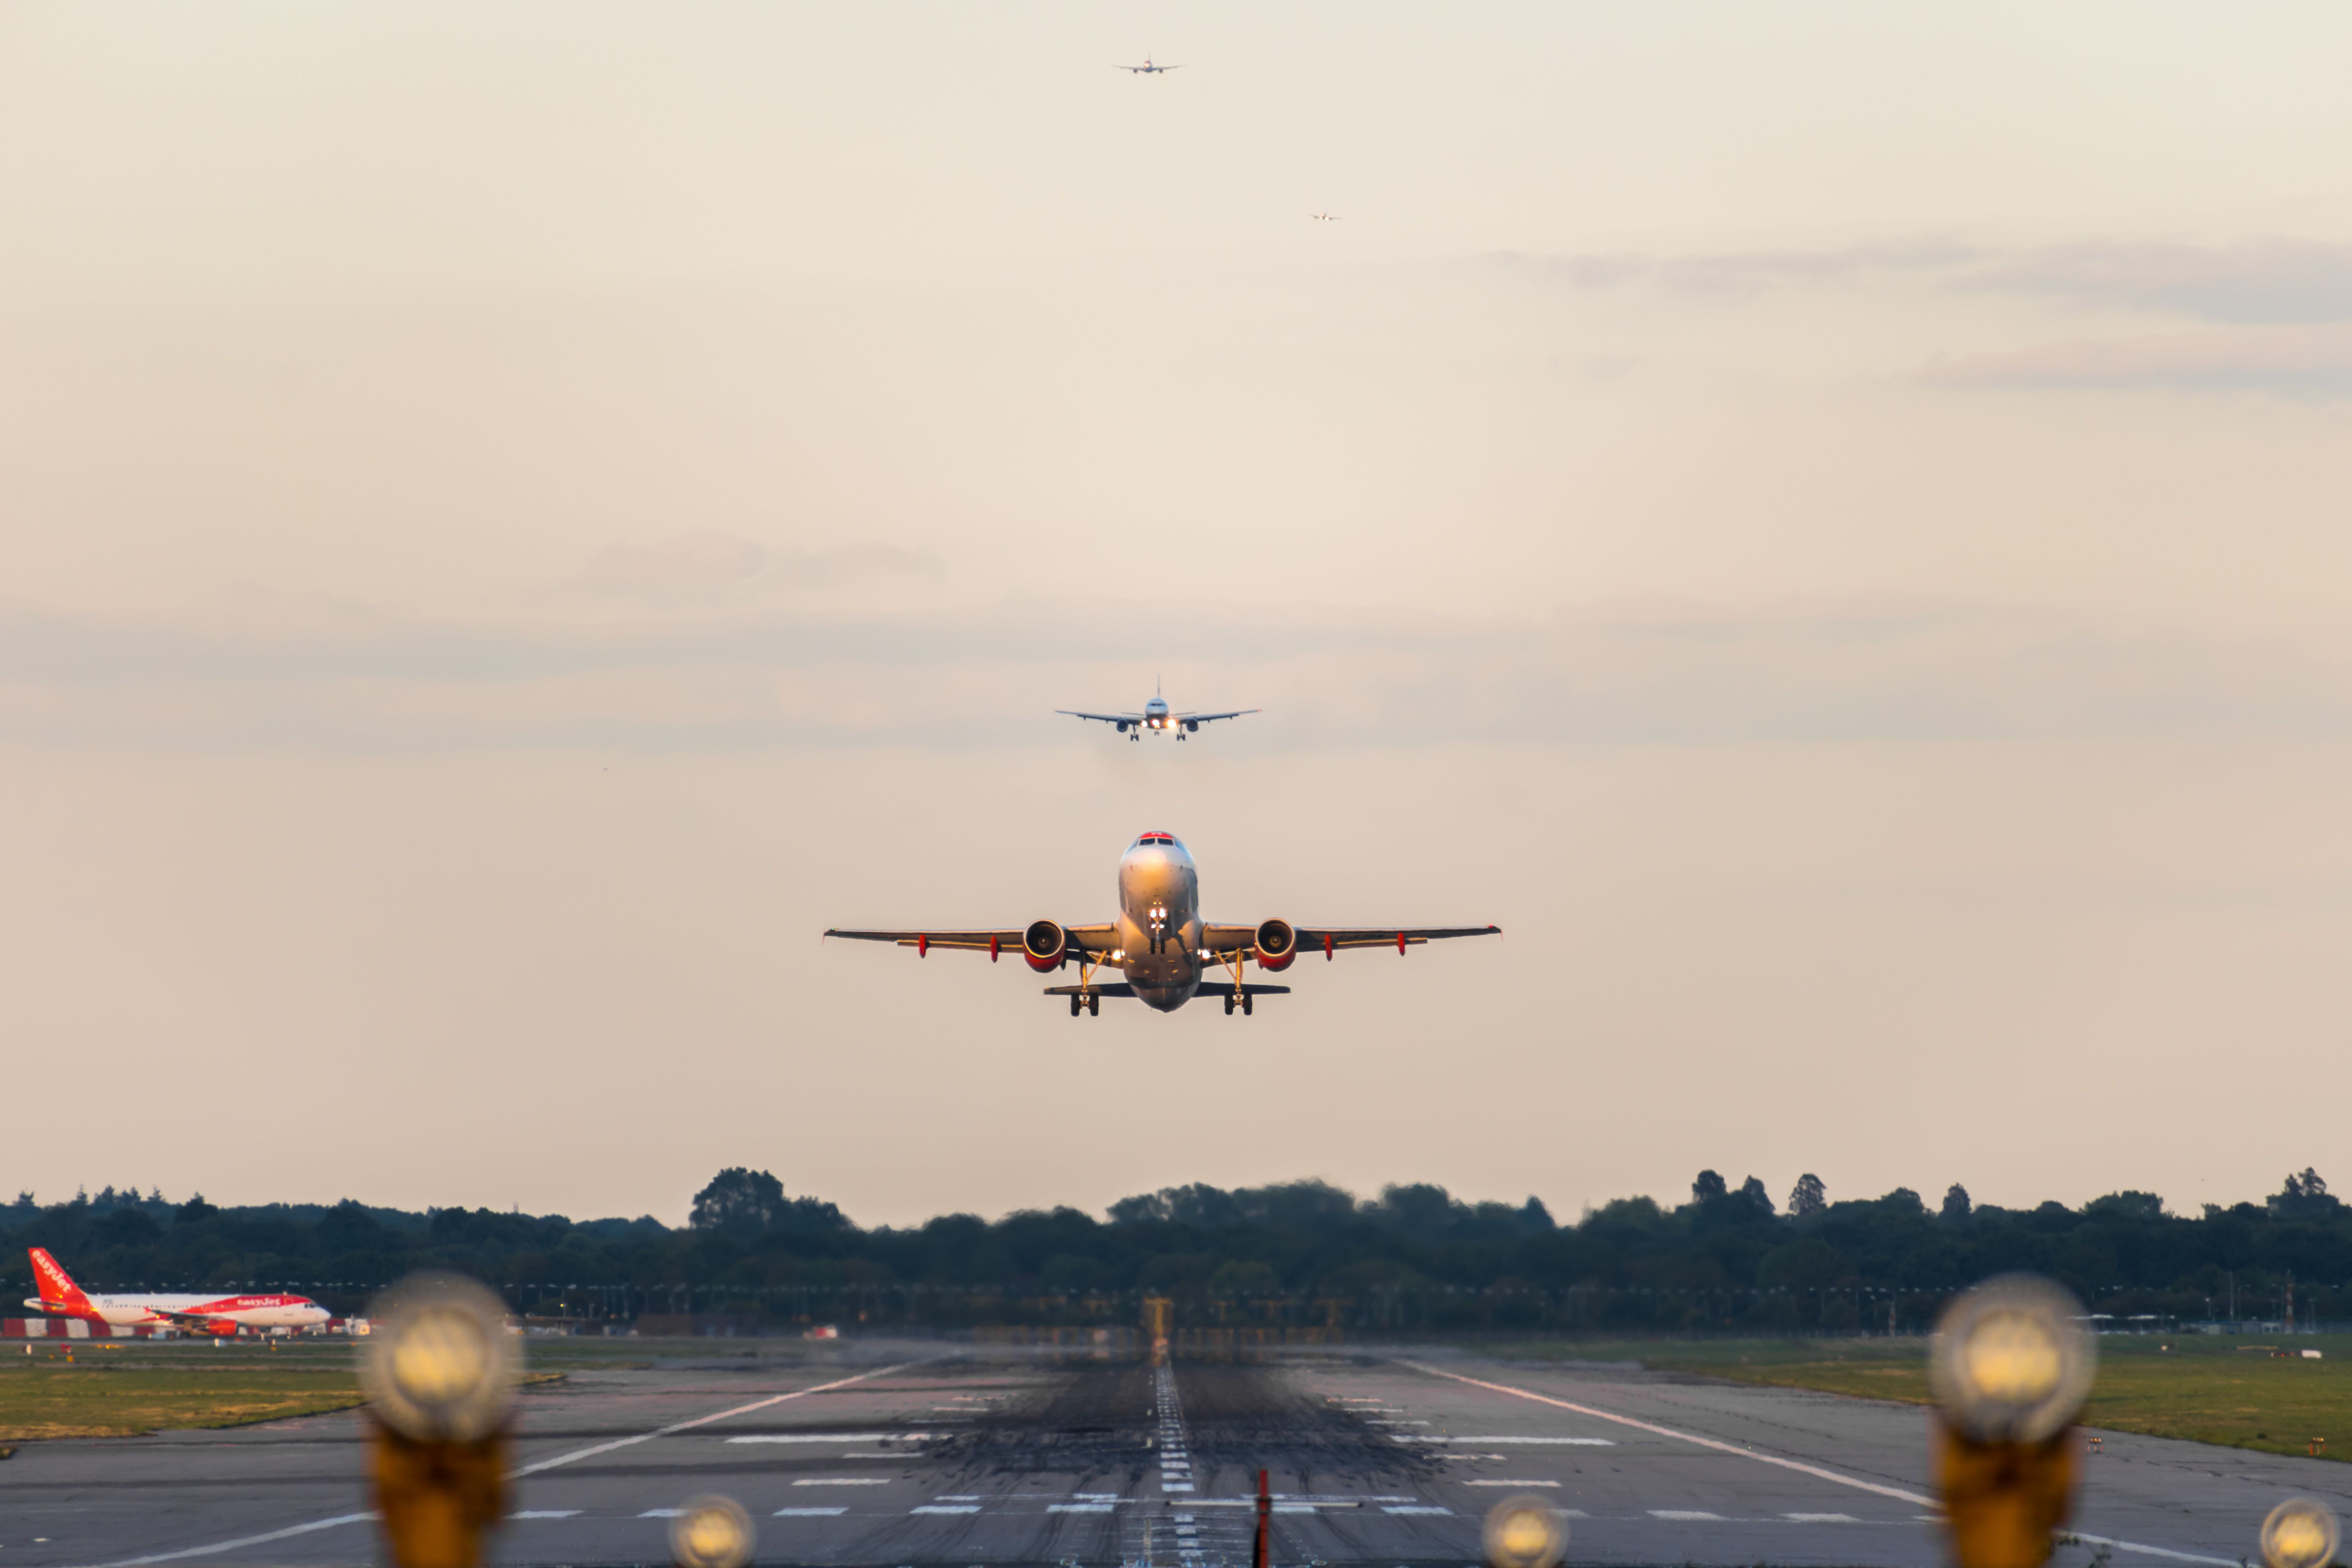 Traffic Above The Runway At London Gatwick Airport